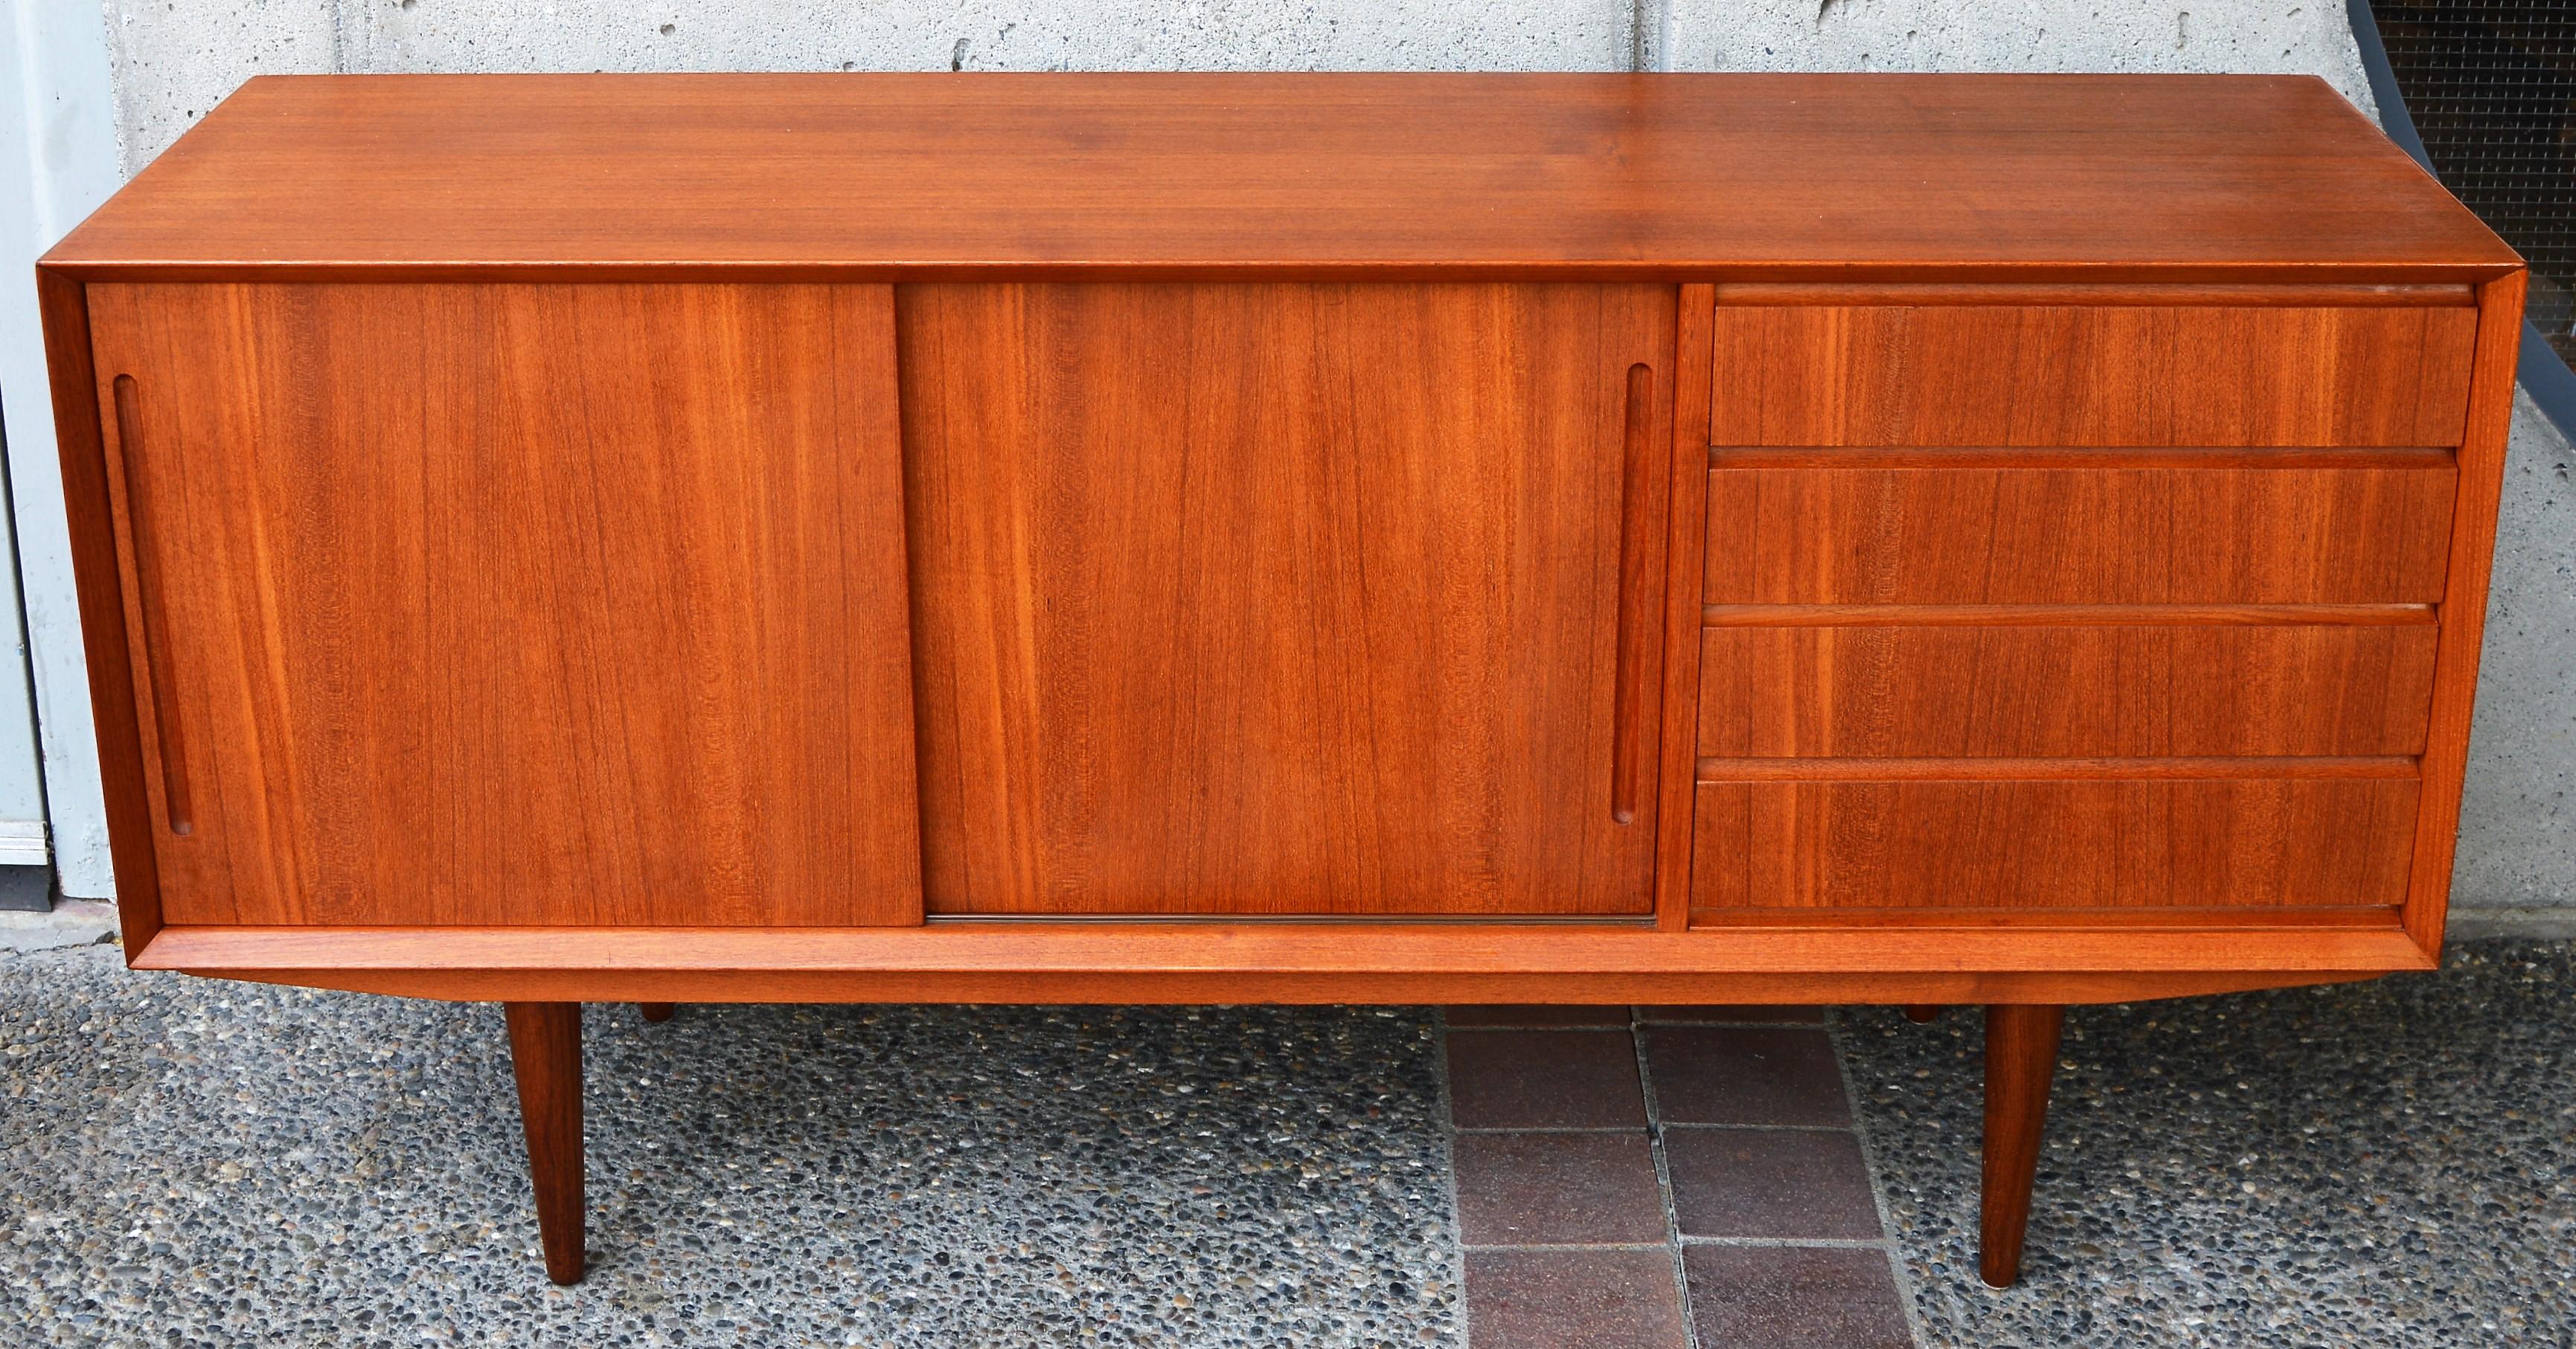 This hot Danish modern mid-size teak credenza or buffet was manufactured by Alderslyst Mobelfabrik, Denmark, in the 1960s. Featuring an asymmetrical bank of drawers on the right, with continuous grain down the drawer fronts, elongated carved drawer